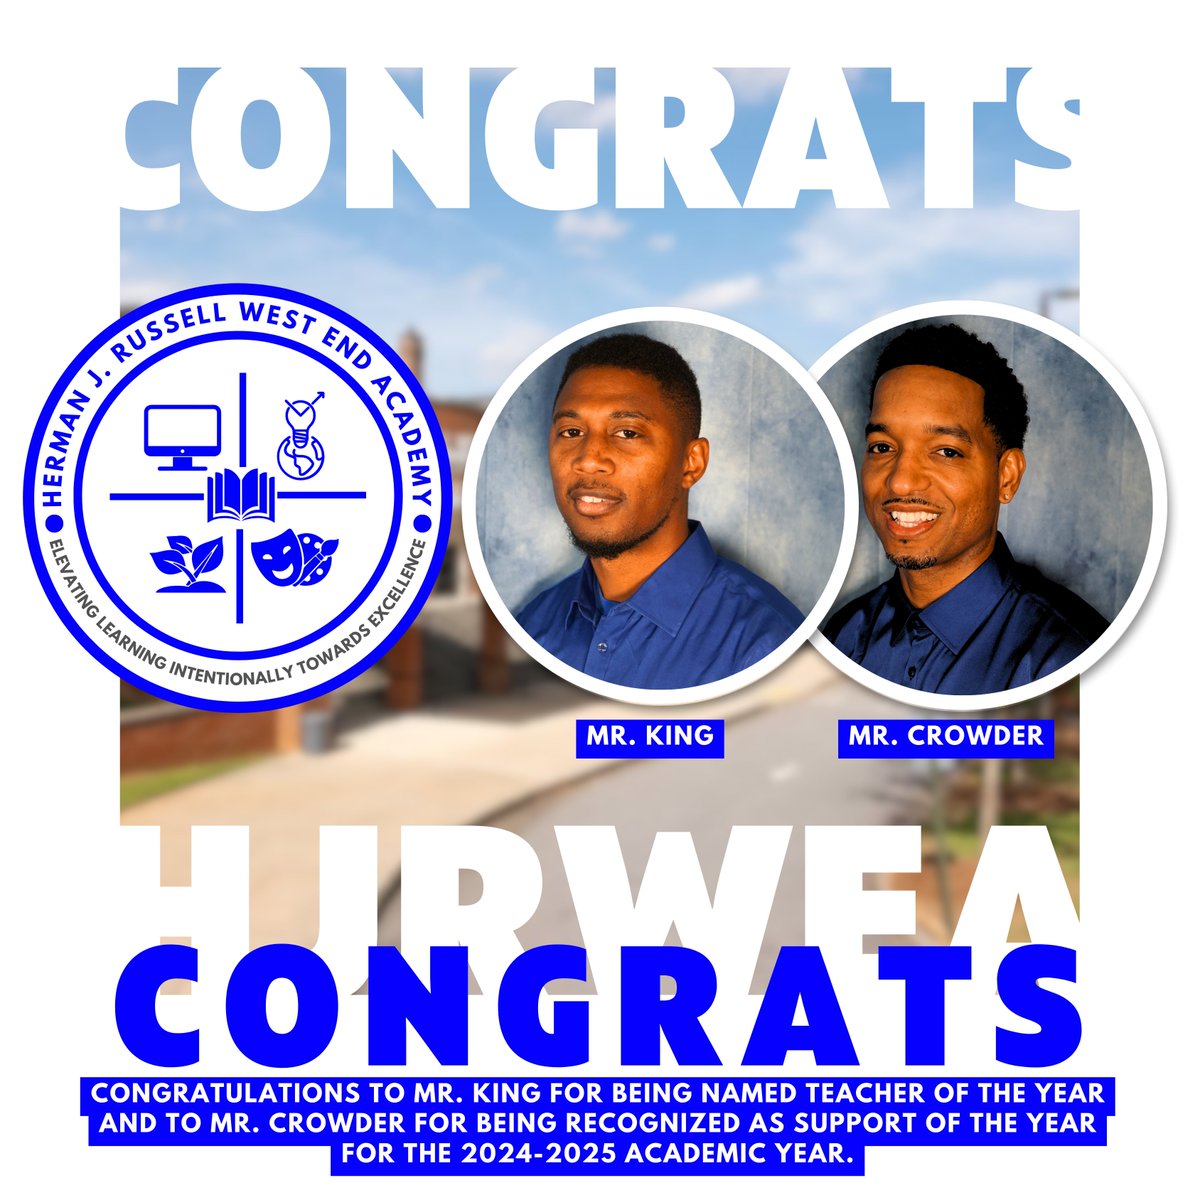 HJRWEA NEWS: Congratulations to Mr. King for being named Teacher of the Year and to Mr. Crowder for being recognized as Support of the Year for the 2024-2025 academic year.